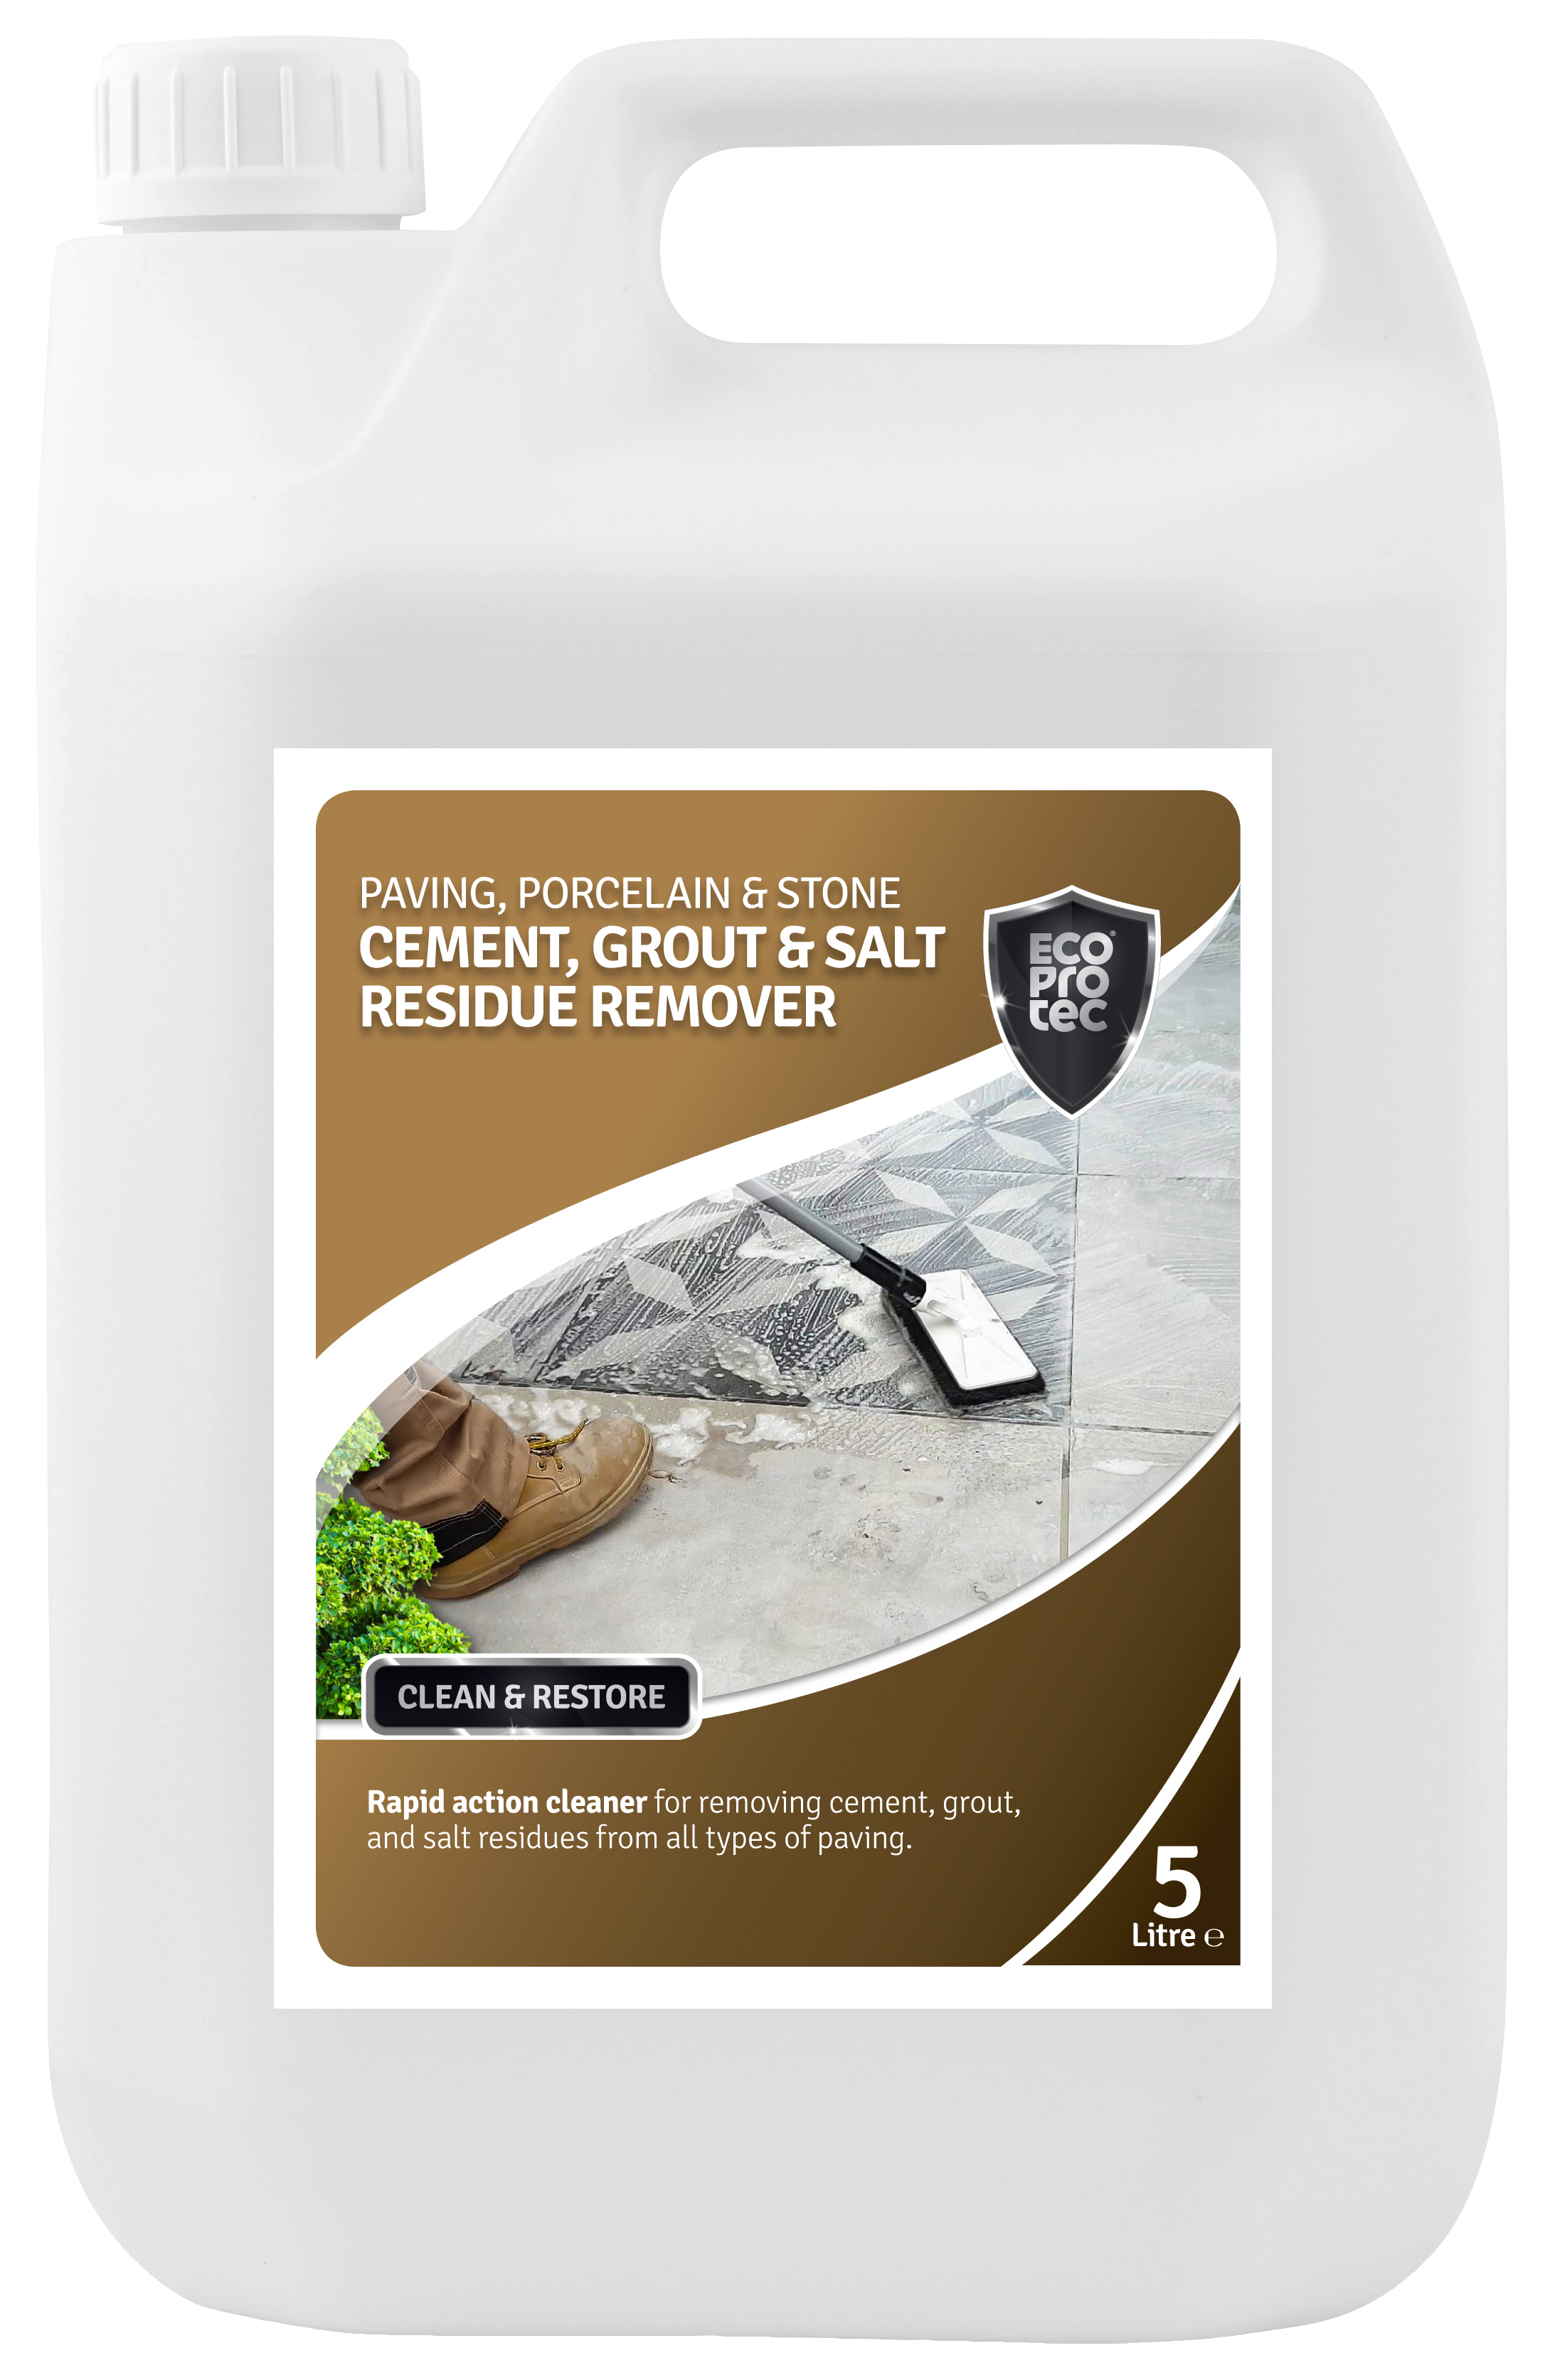 Ecoprotec Cement, Grout & Salt Residue Remover - 5L